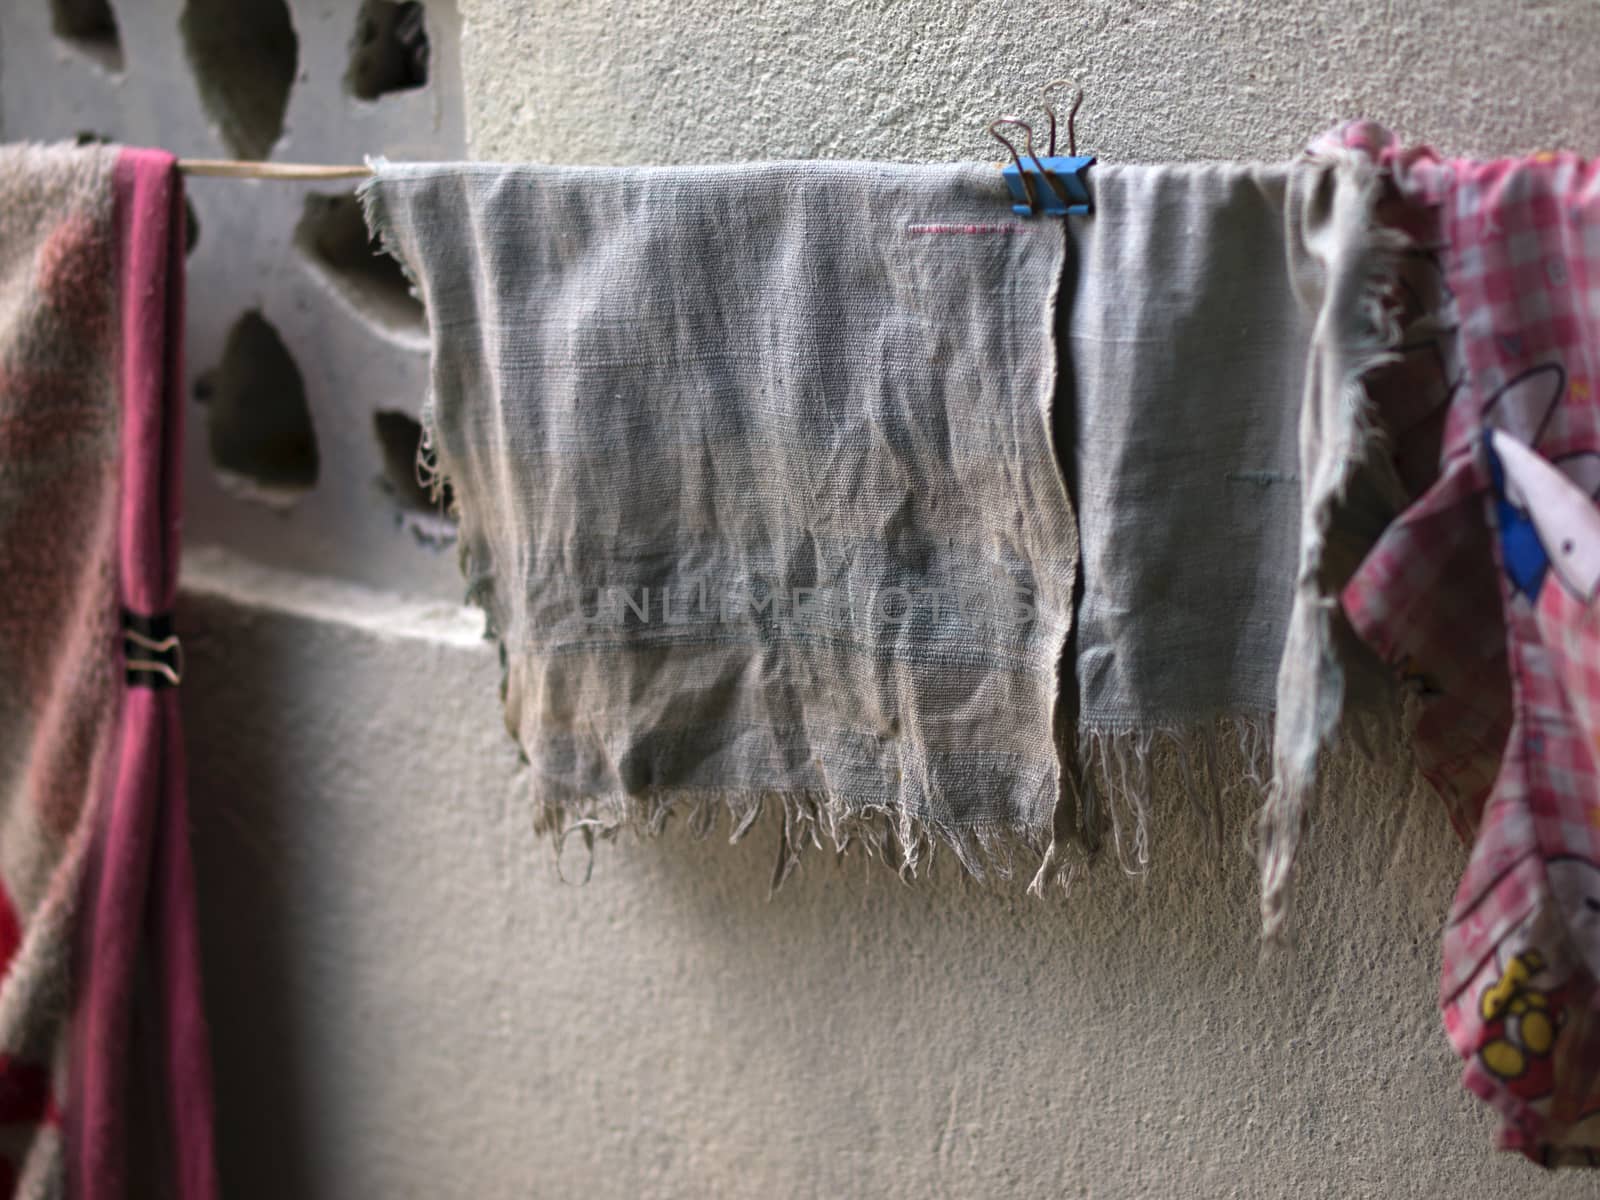 COLOR PHOTO OF OLD AND FADED HANDKERCHIEF DRYING OUTSIDE